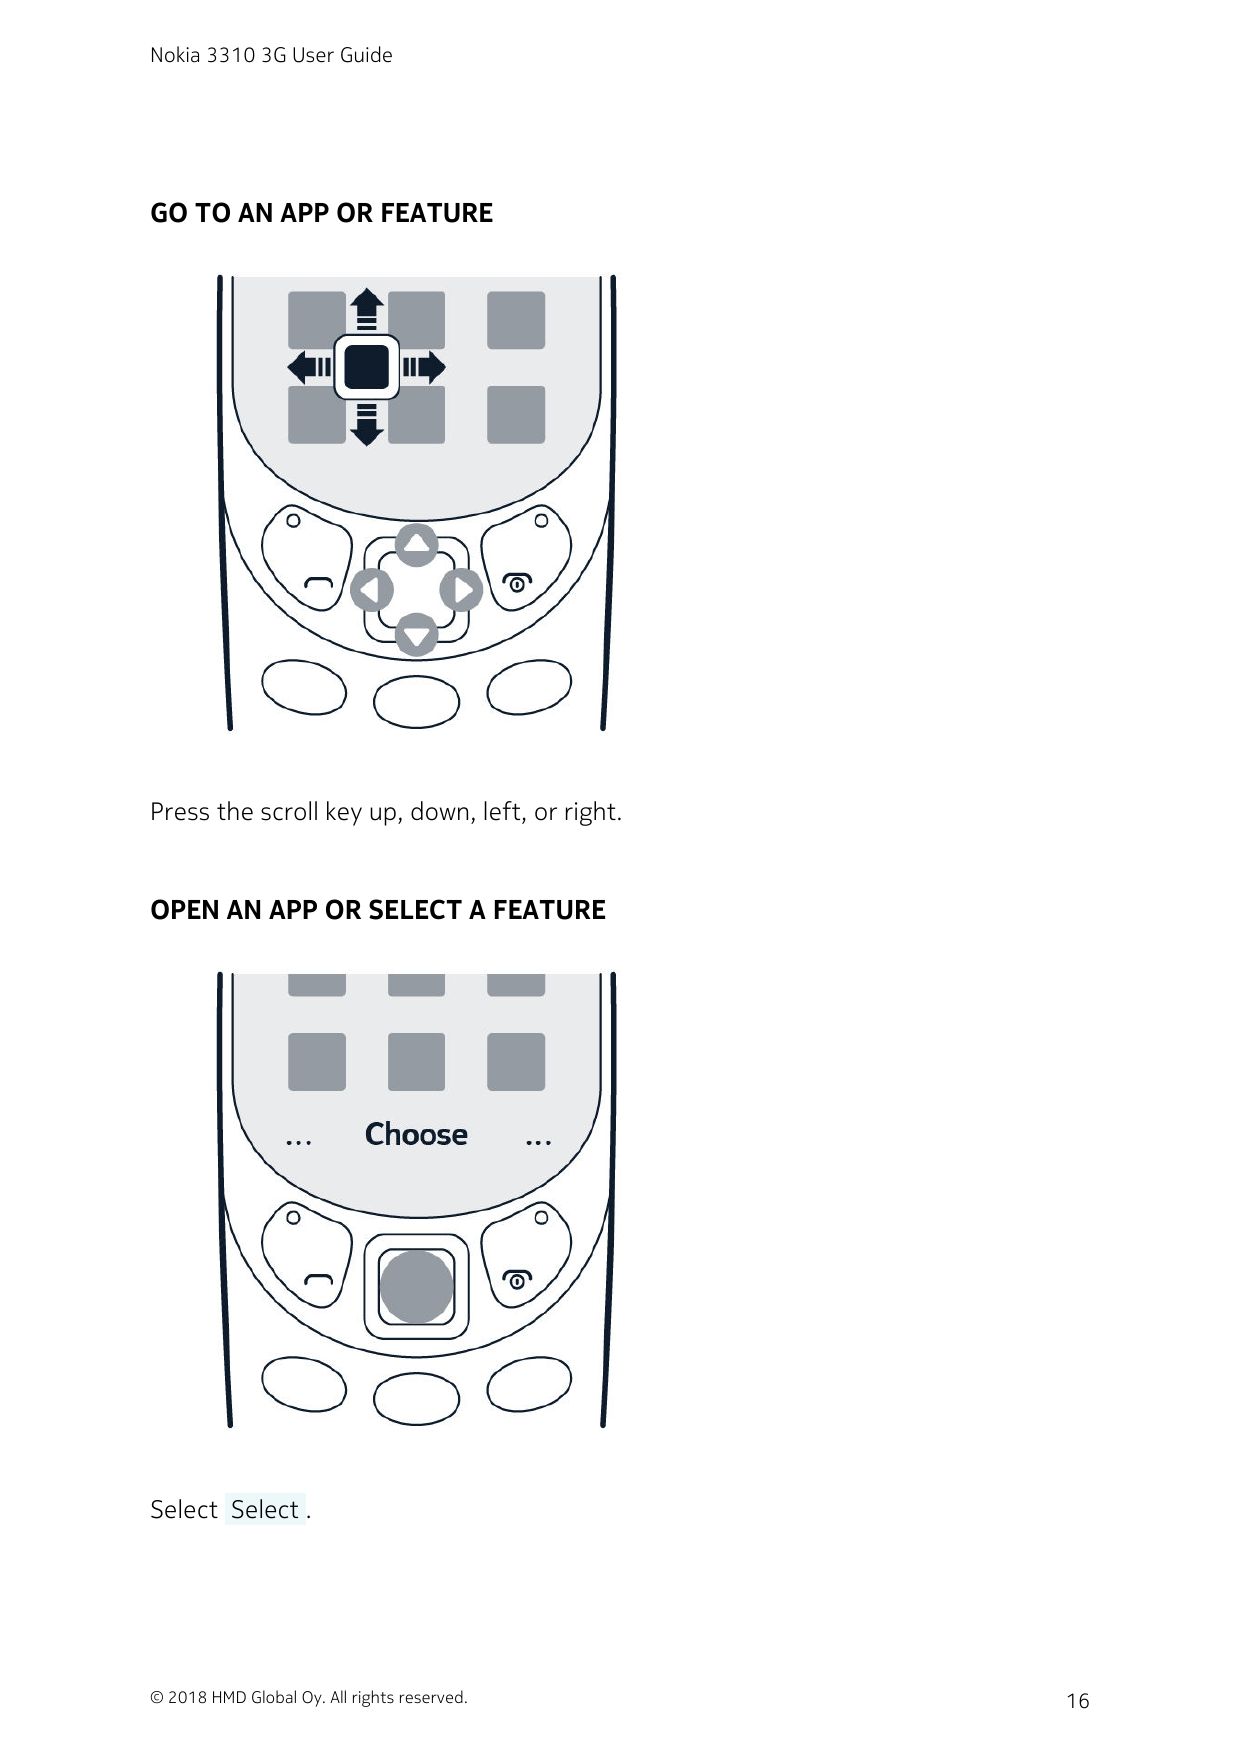 Nokia 3310 3G User GuideGO TO AN APP OR FEATUREPress the scroll key up, down, left, or right.OPEN AN APP OR SELECT A FEATURESele